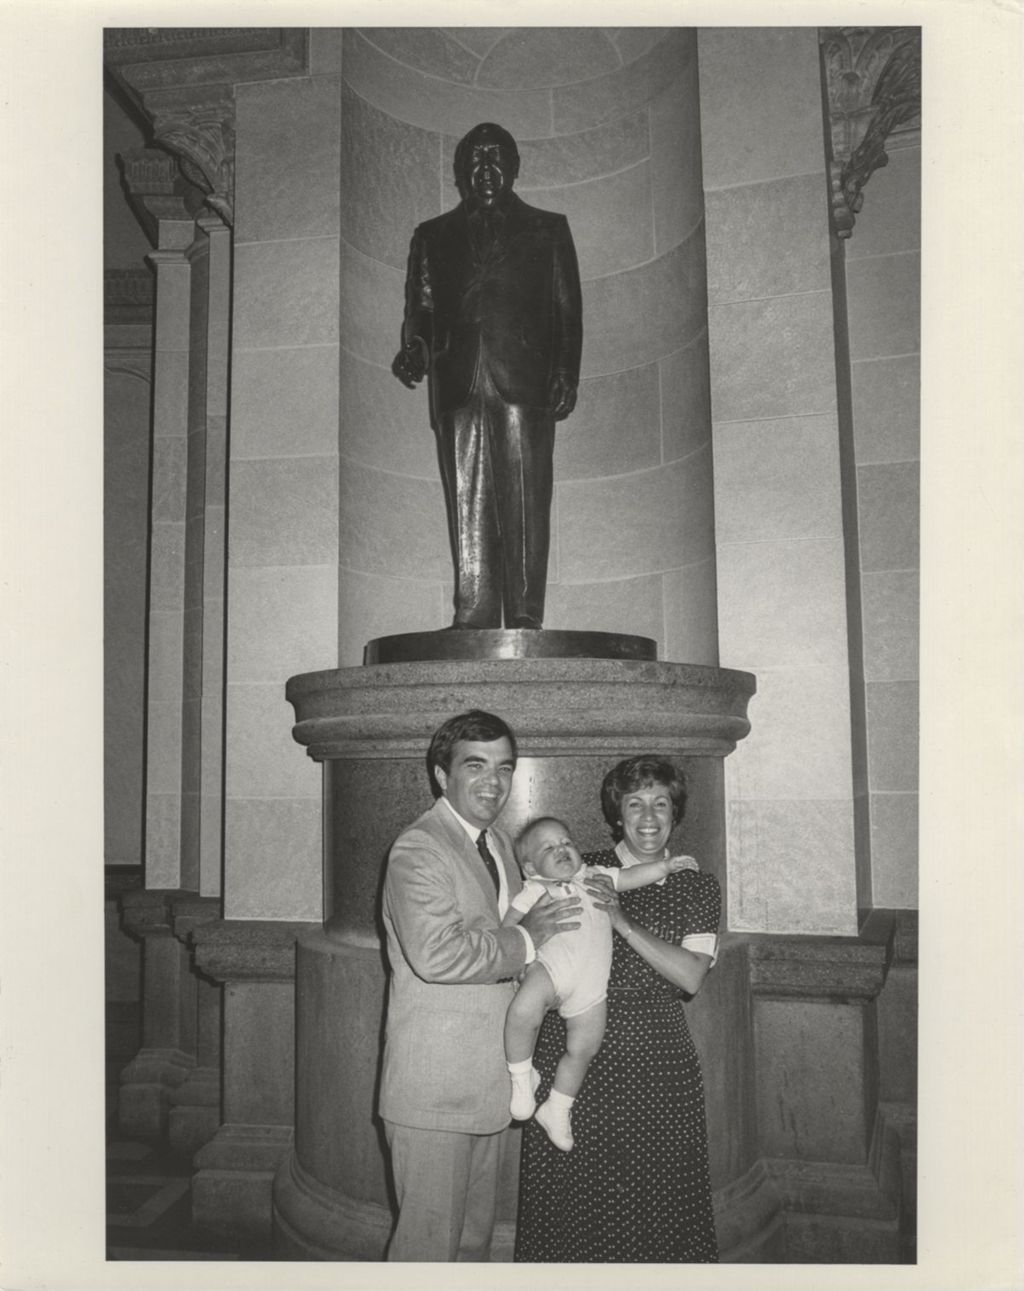 Miniature of John, Mary Lou, and John Daley, Jr., in front of the Richard J. Daley statue